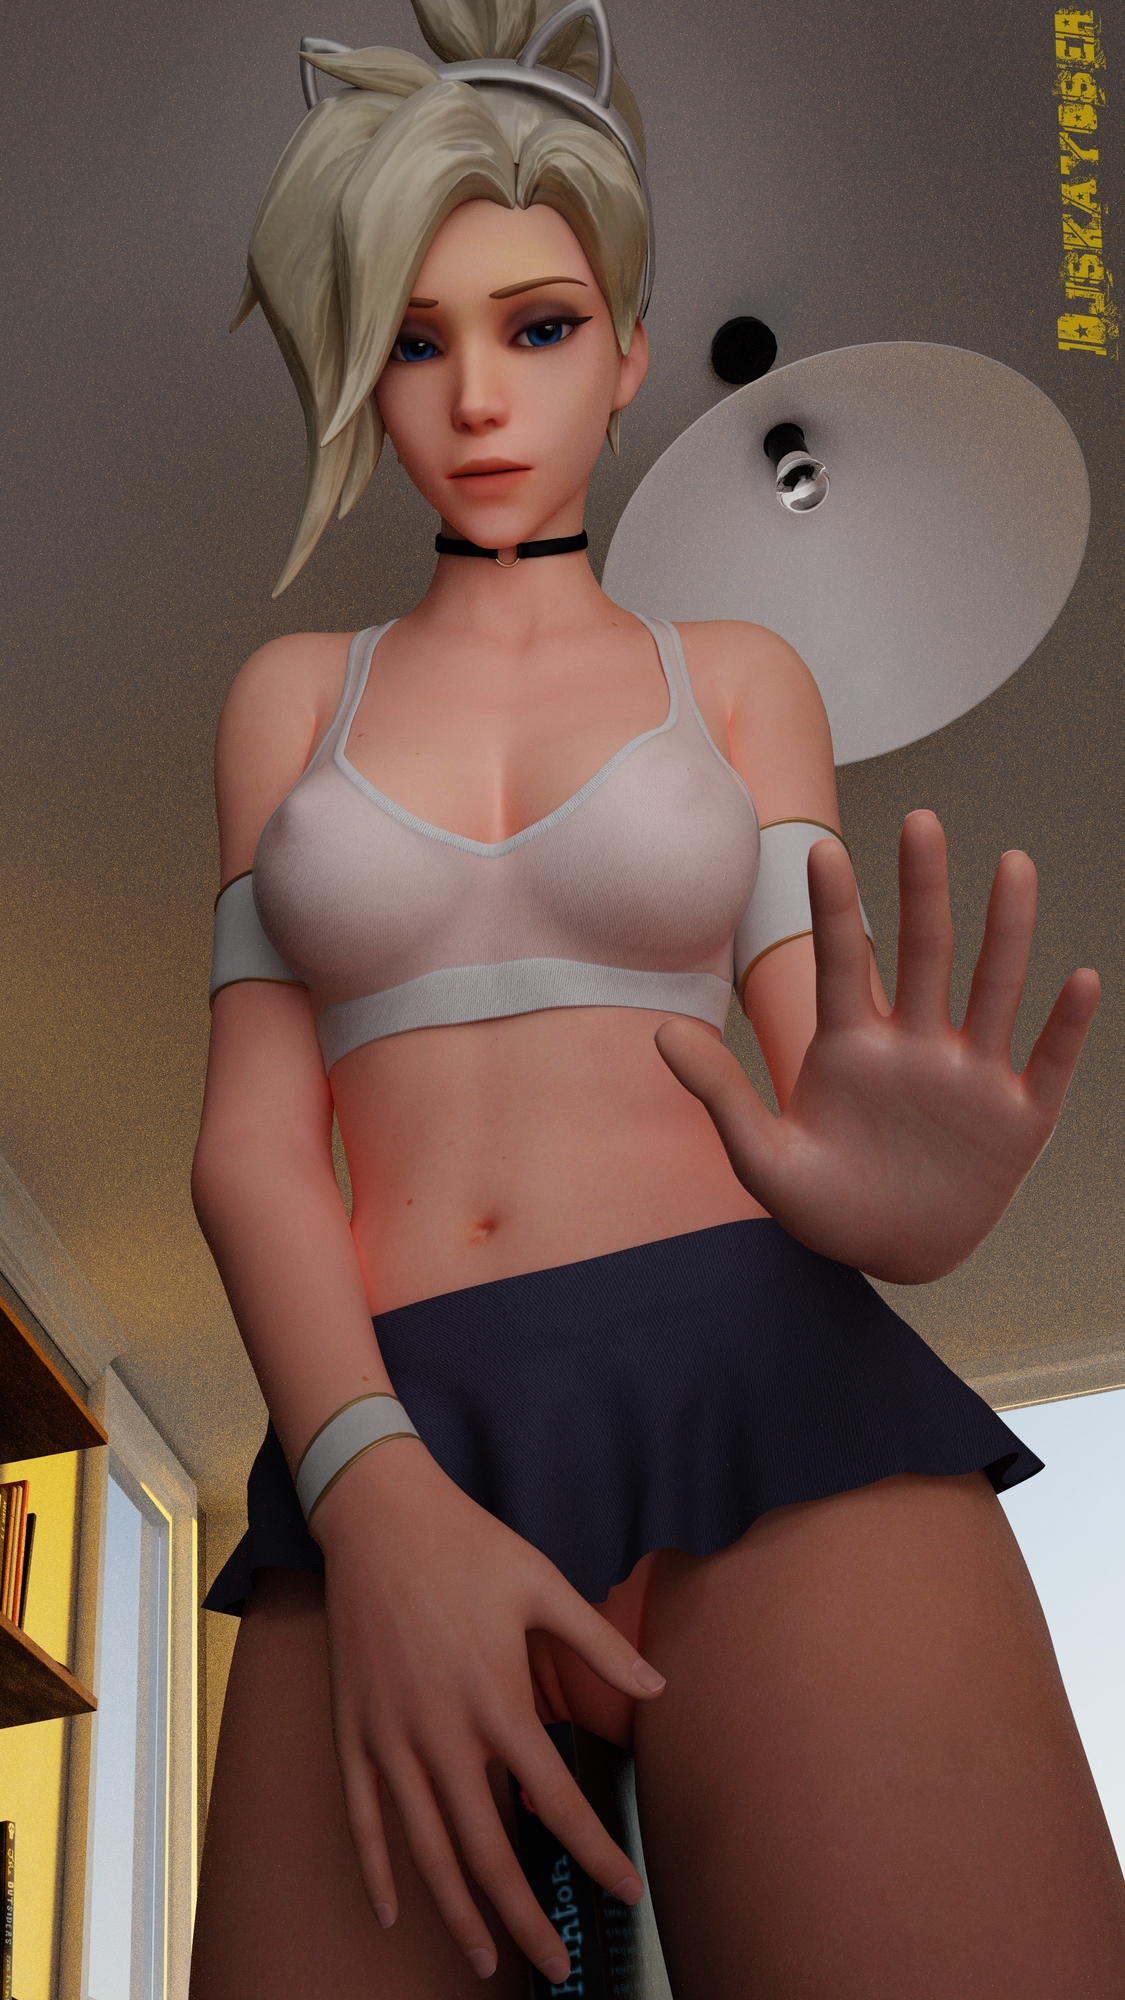 Hey what are you doing here I'm not expected to see you here Mercy Mercyoverwatch Overwatch Nsfw R34 Rule34 Rule 34 Blendernsfw Blender3d 3dnsfw Artshare